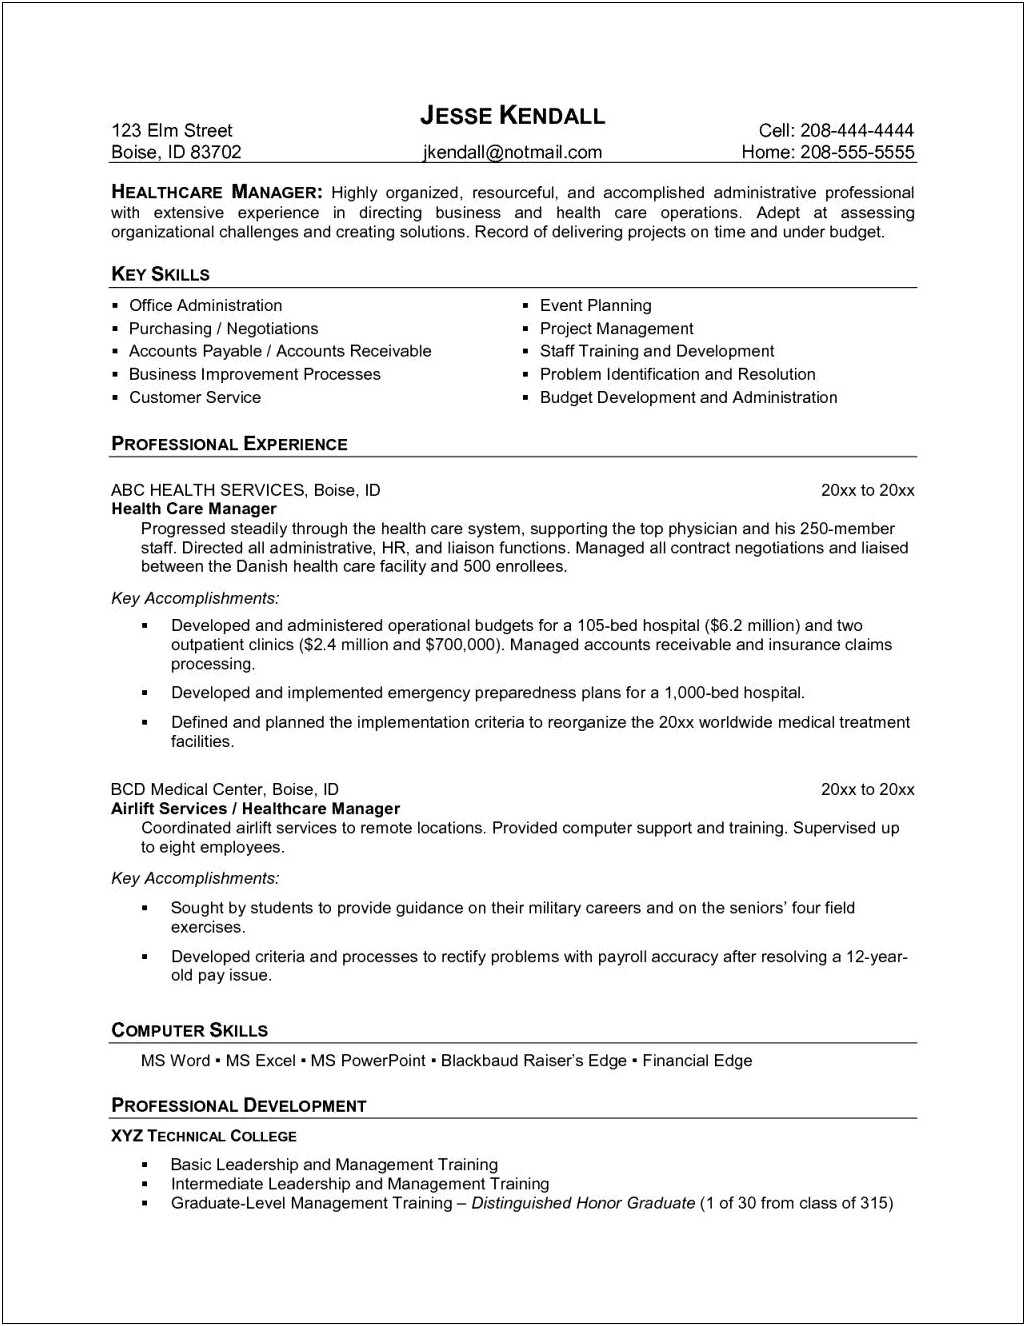 Resume Objective Examples Healthcare Management